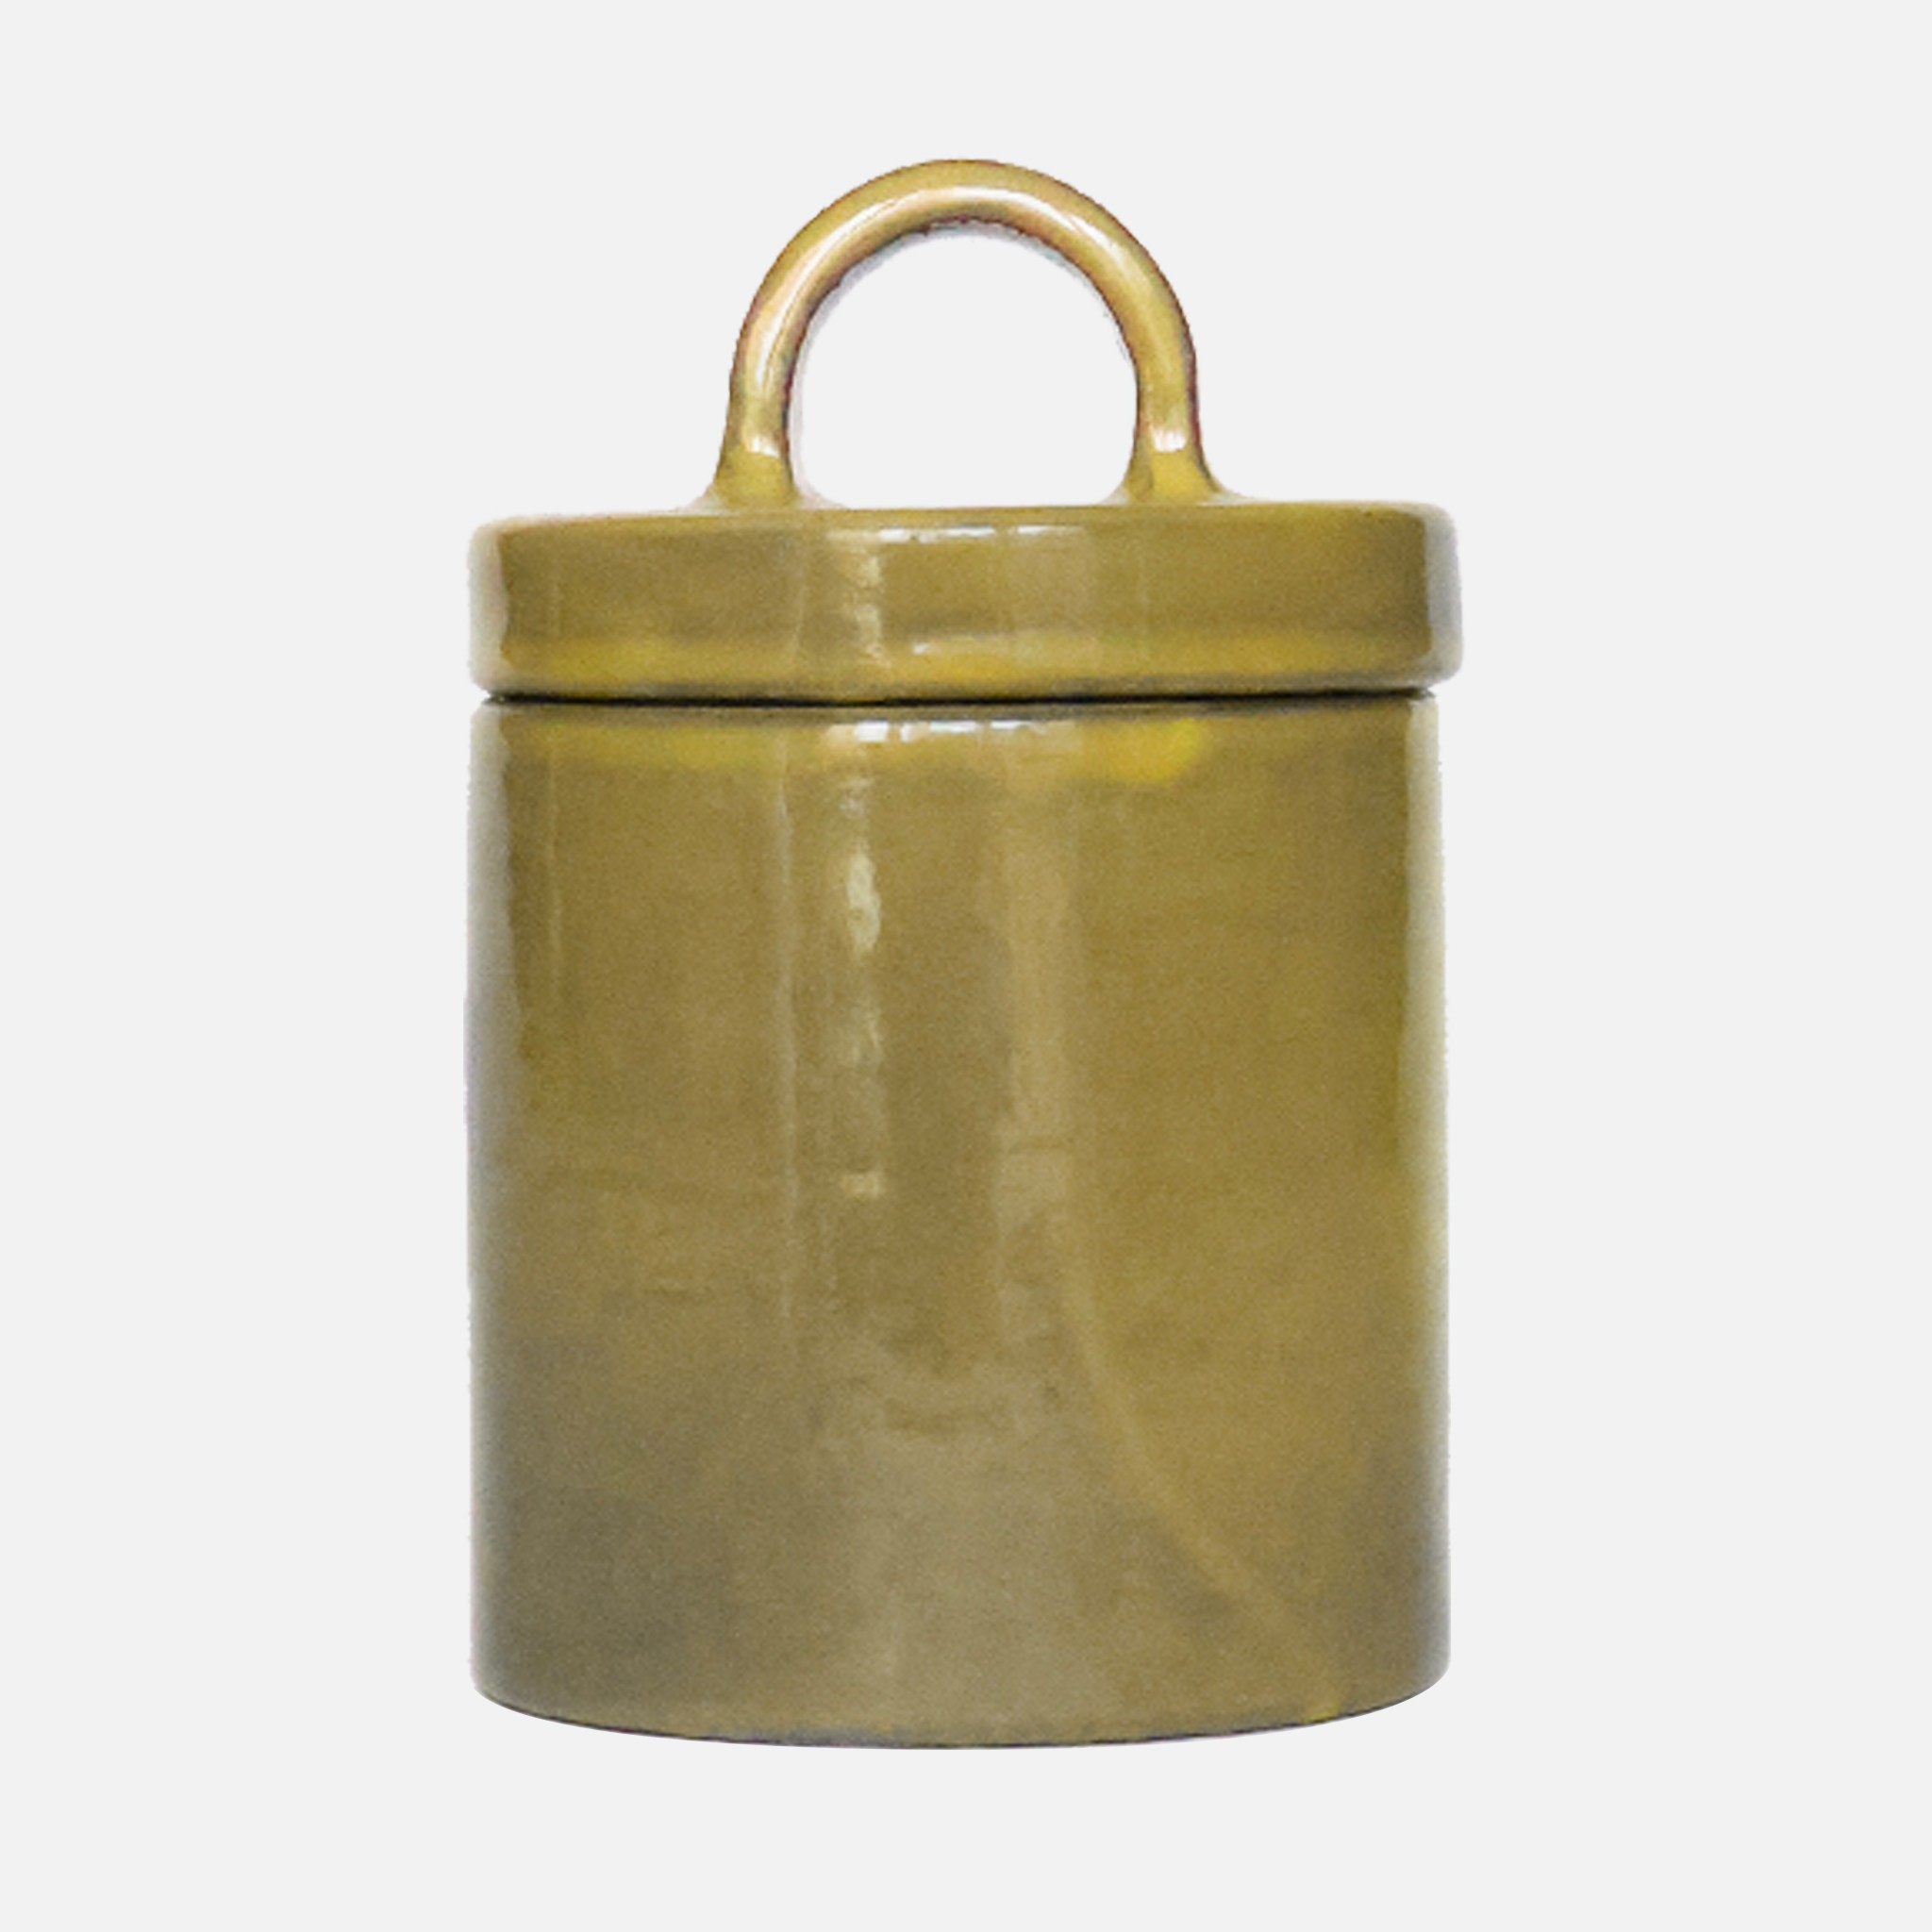 a yellow canister with a handle on a white background